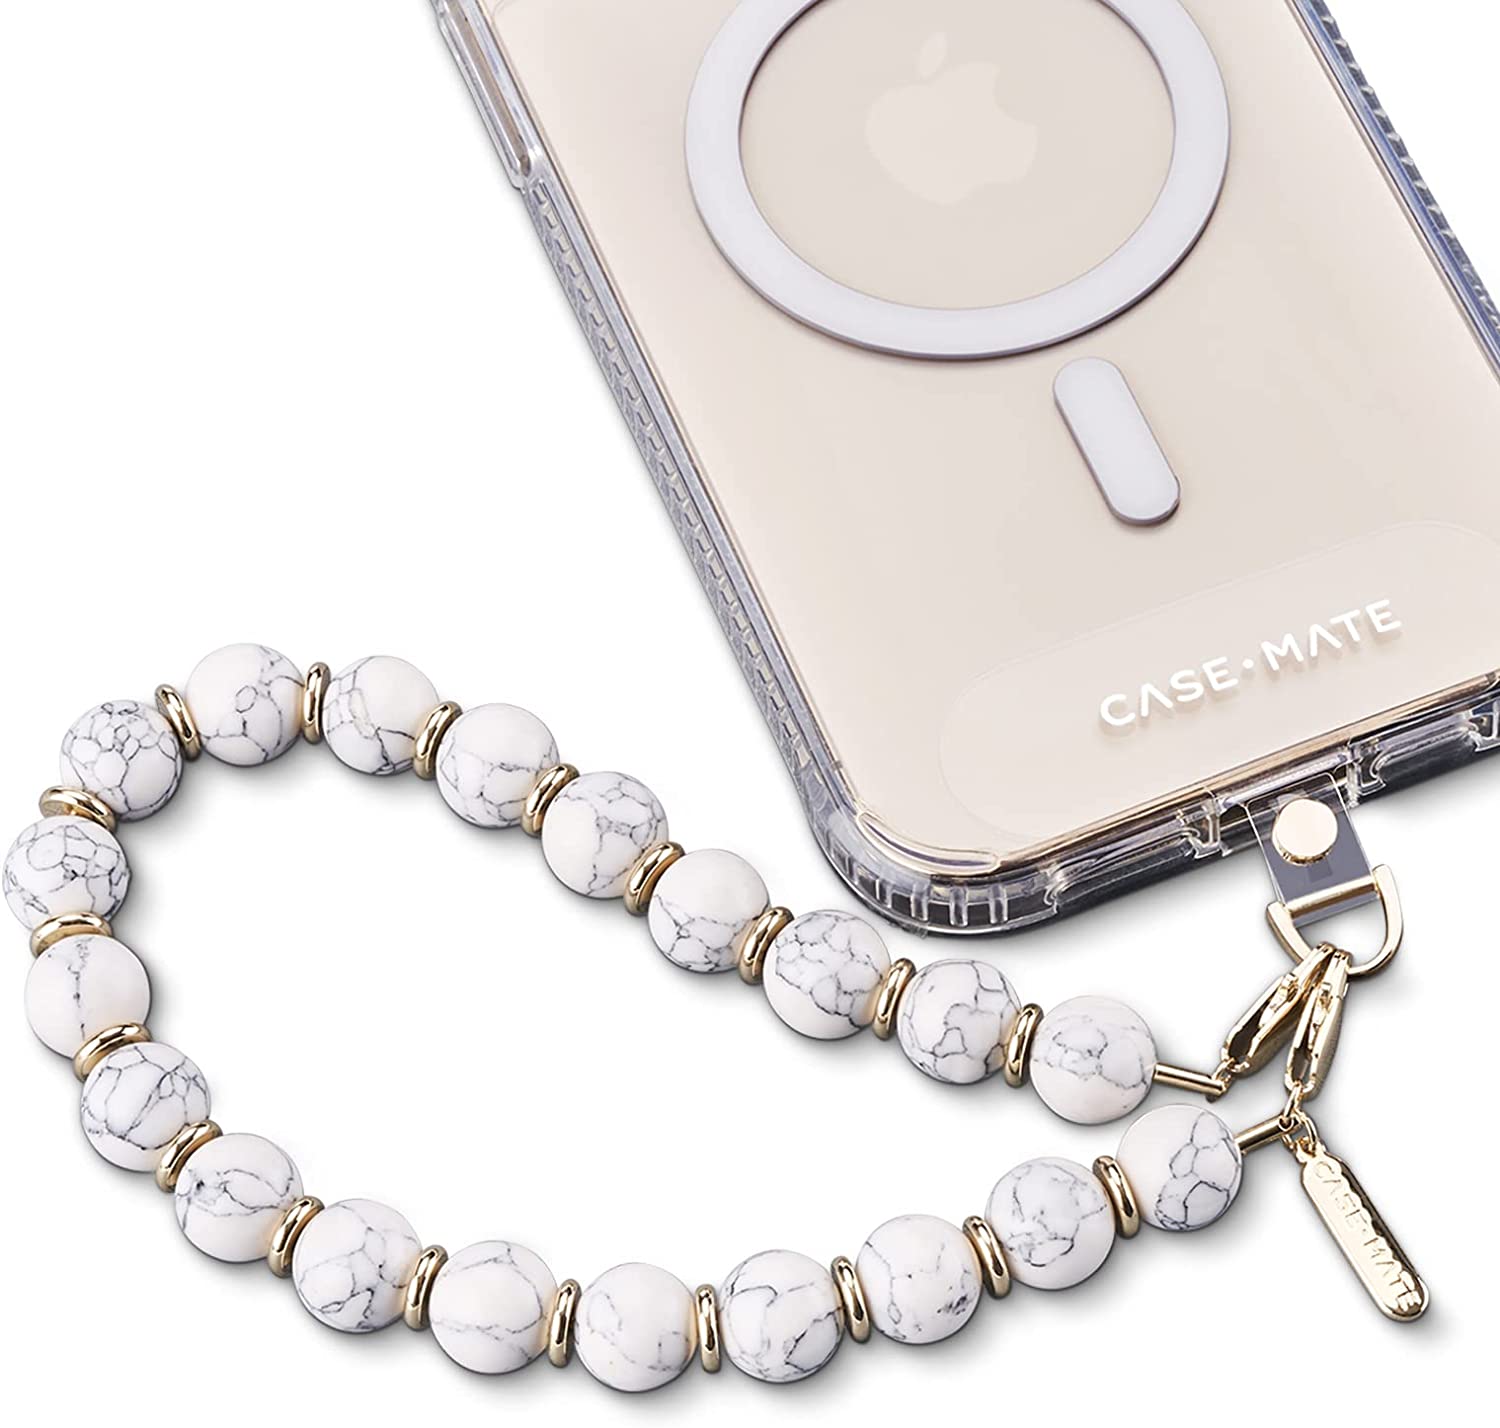 Case-Mate Phone Strap with Gold Metal Chain - Detachable Phone